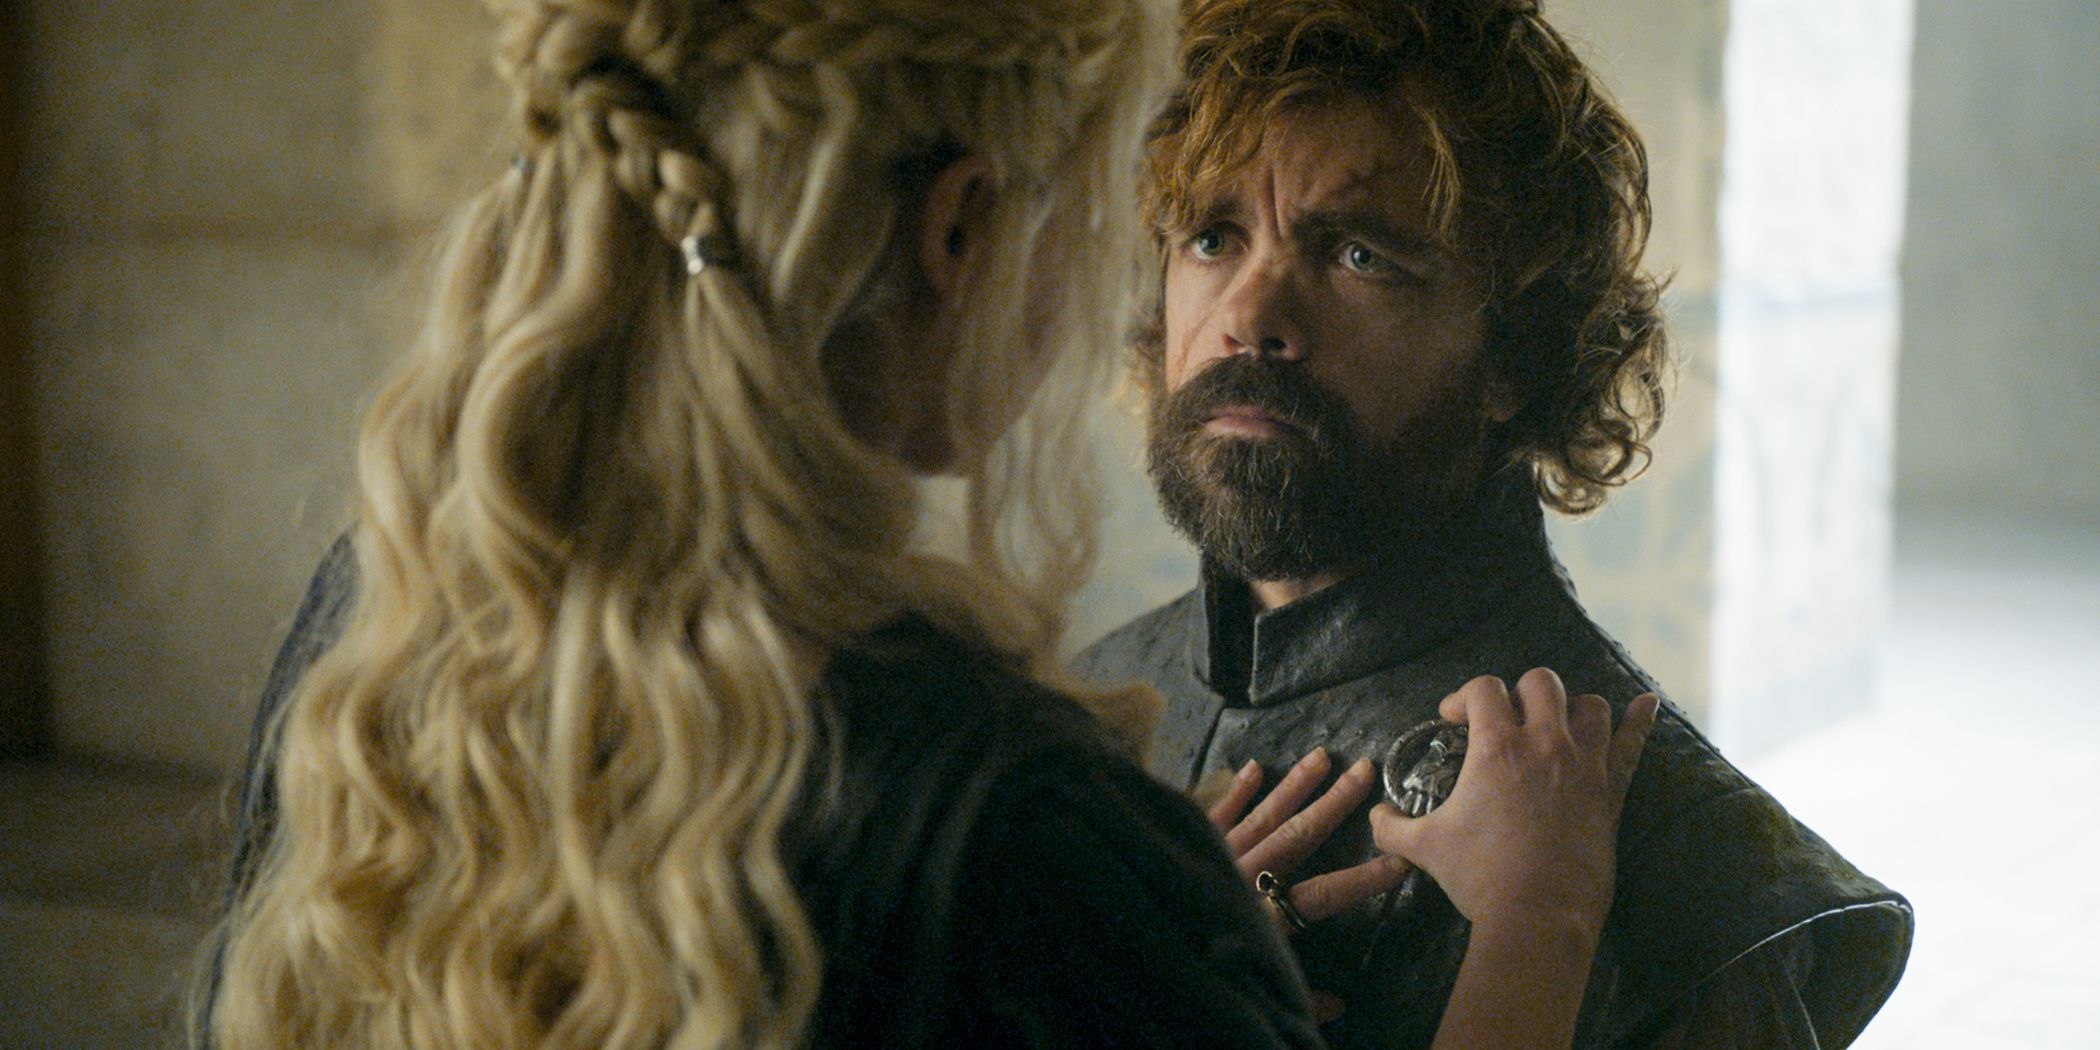 Daenerys pins the Hand of the Queen medal on Tyrion Lannster in Game of Thrones